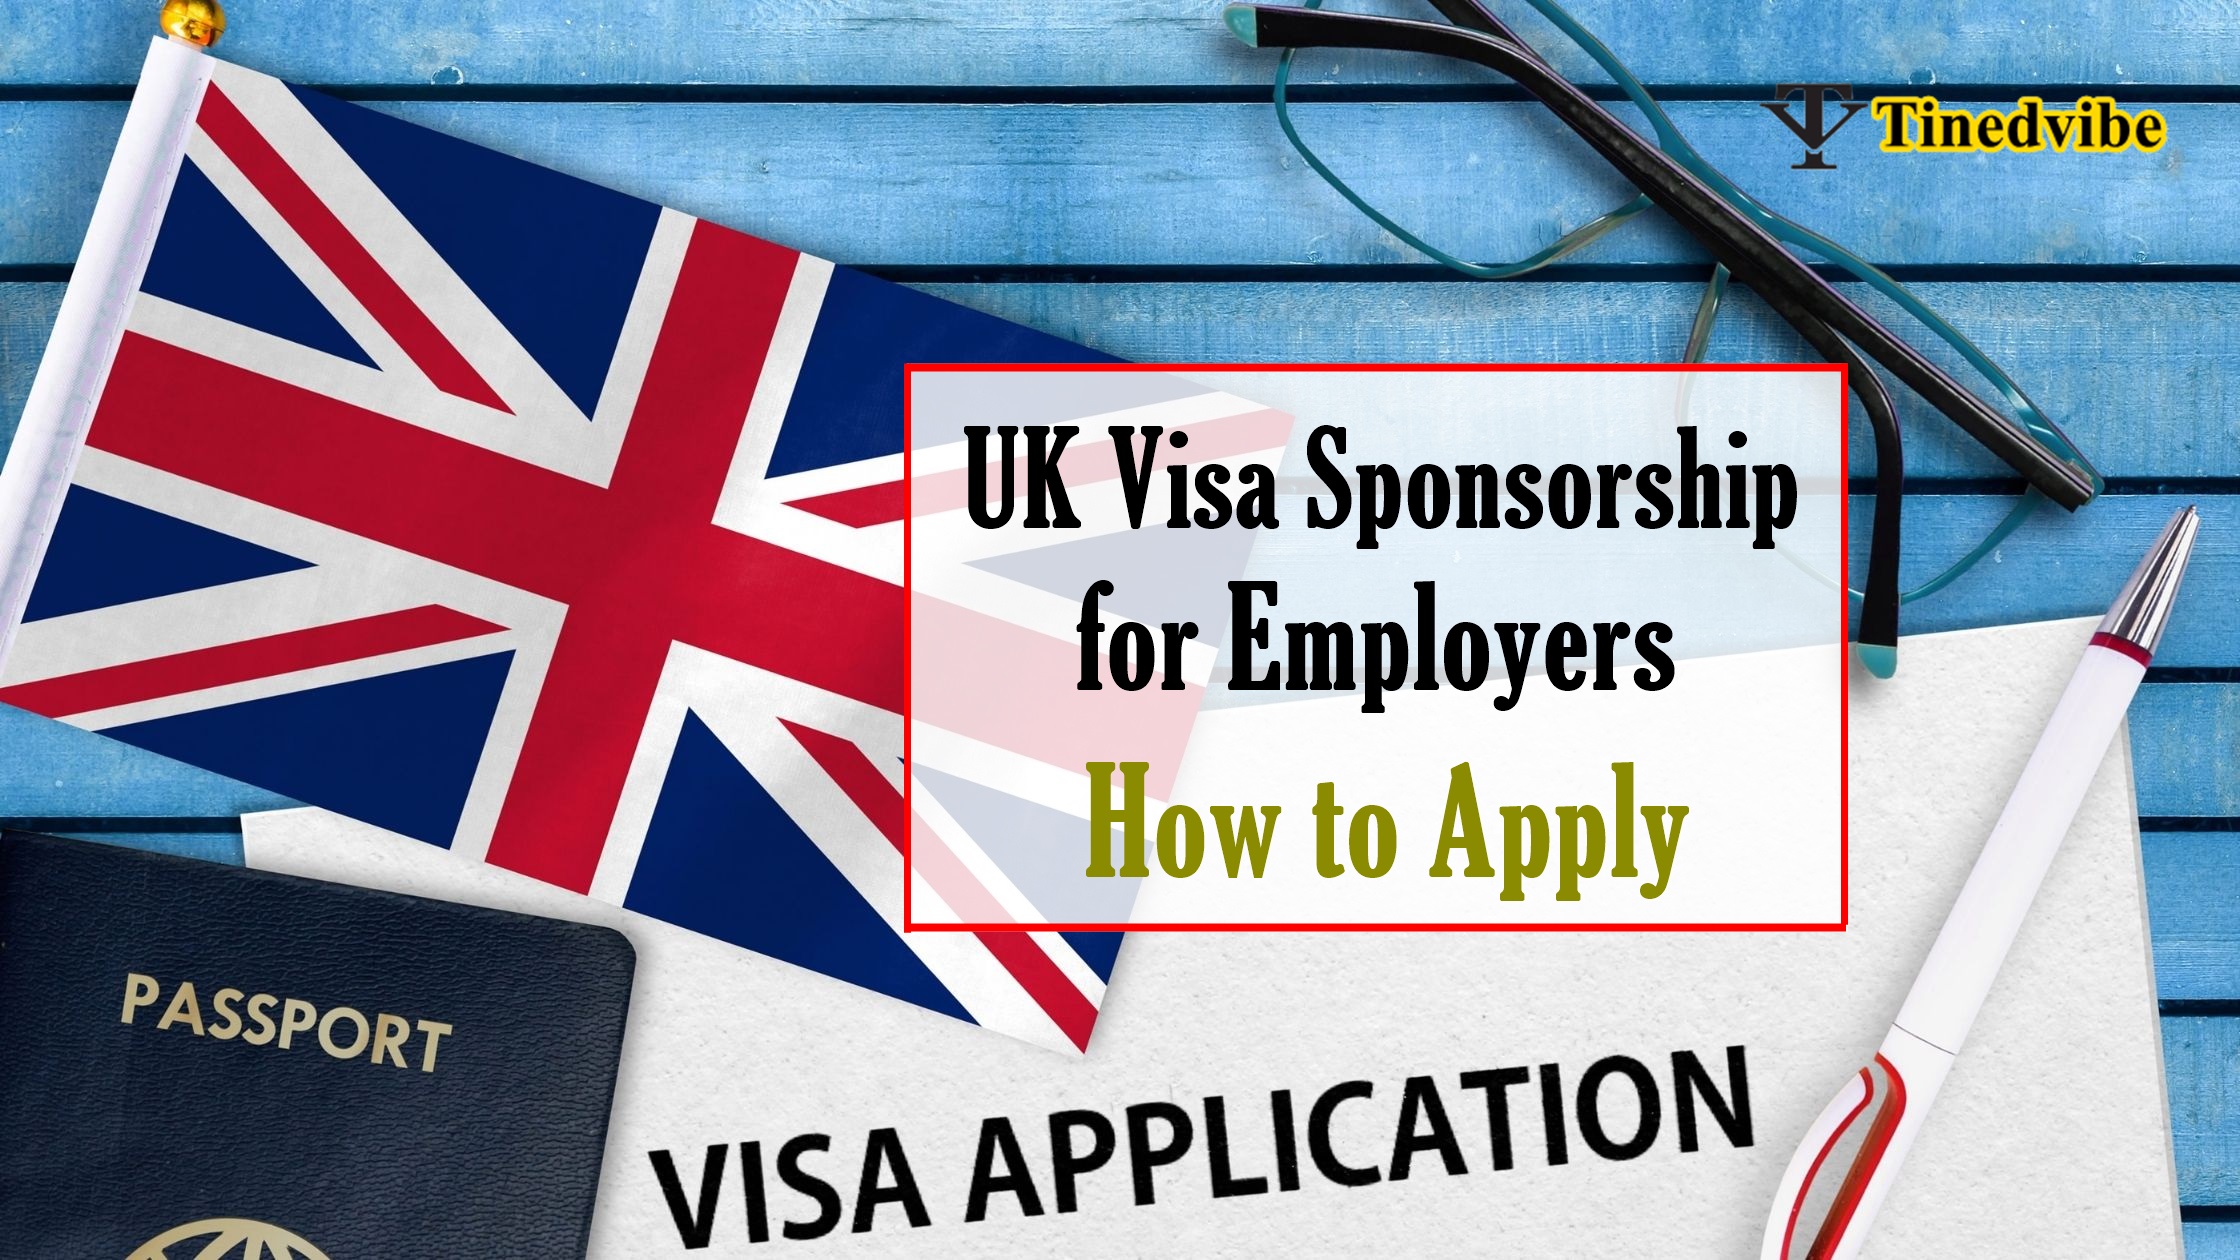 UK Visa Sponsorship for Employers How to Apply Tined Vibe